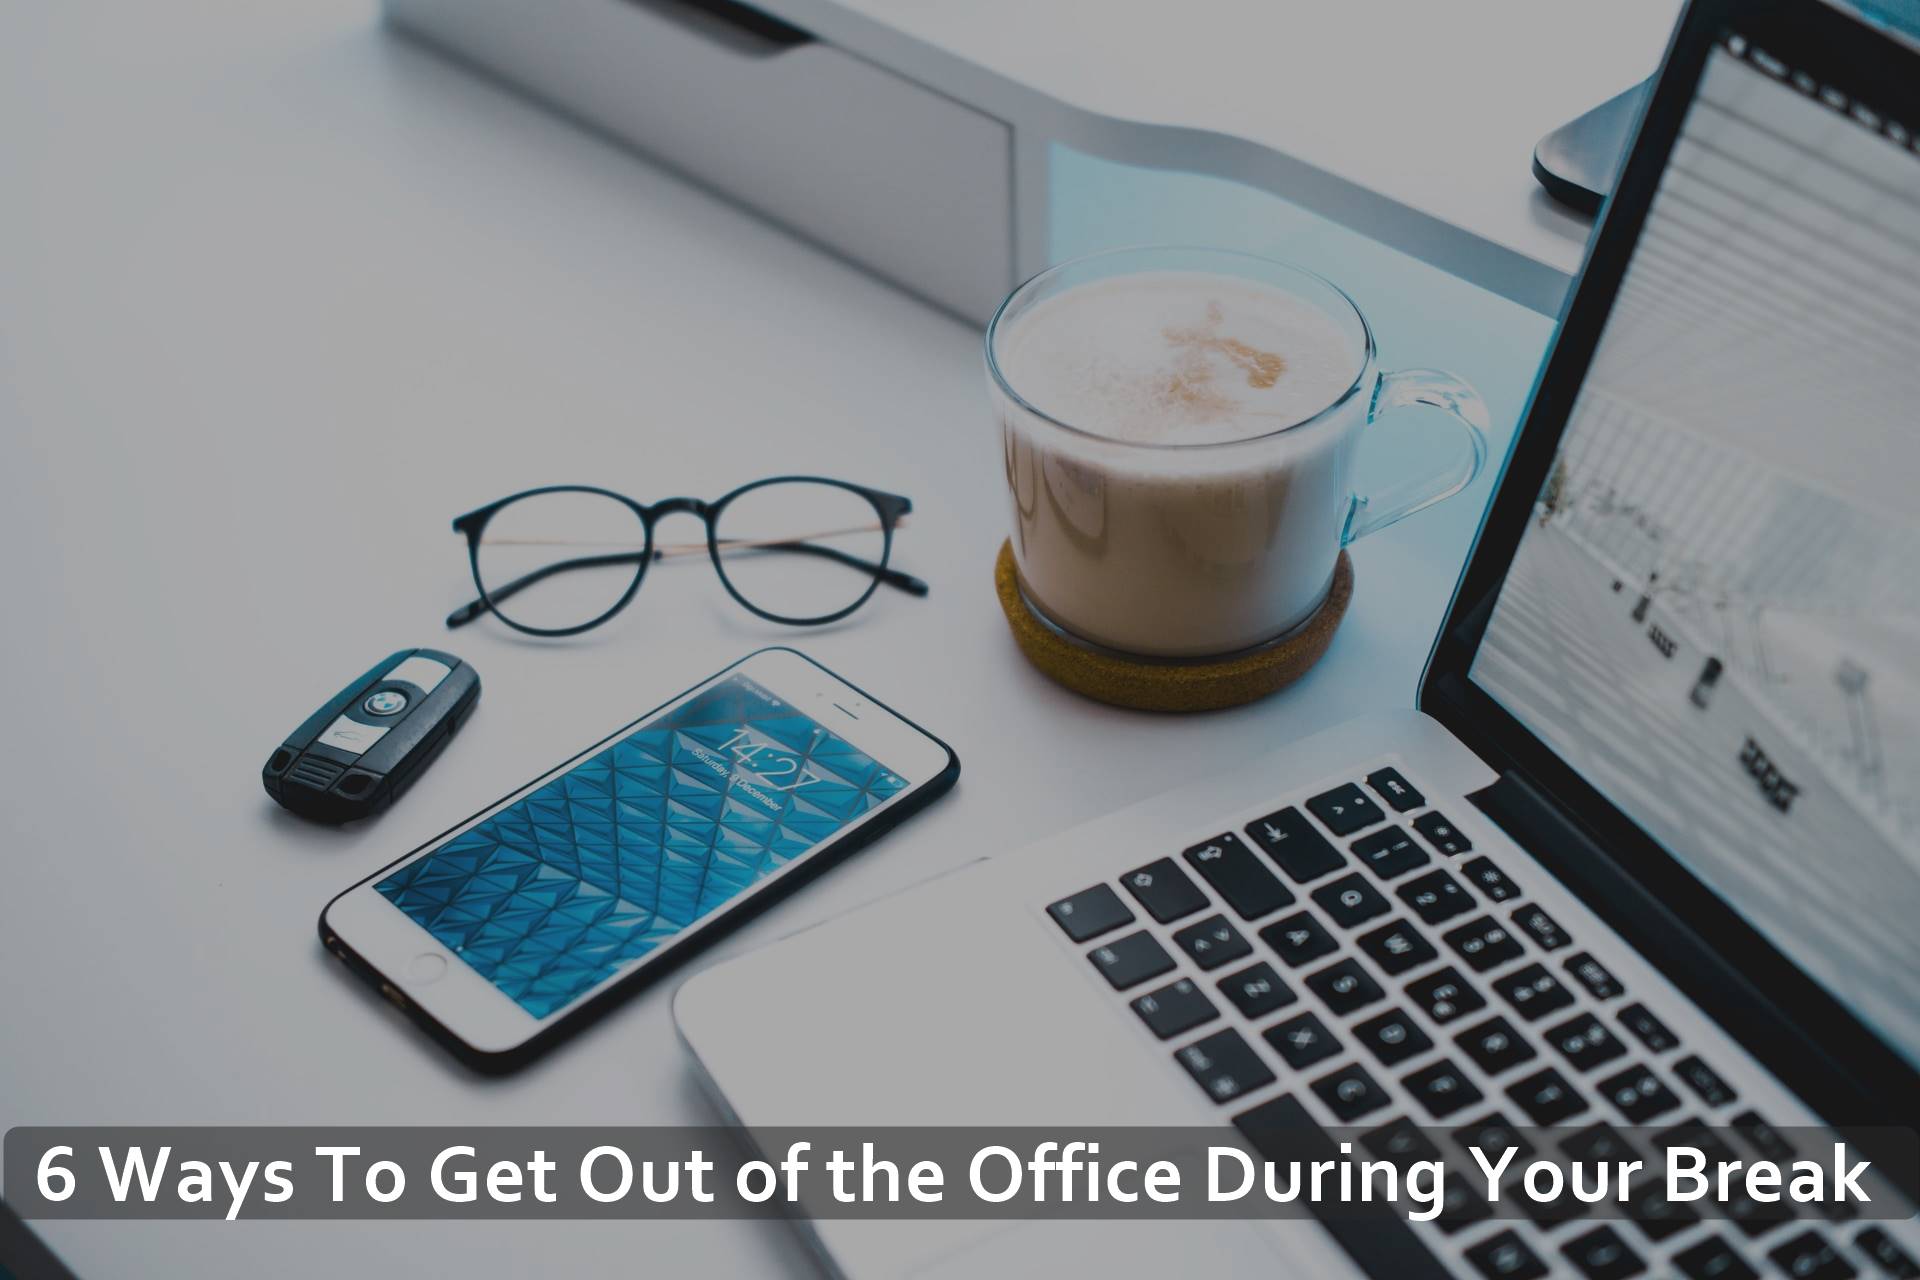 6 Ways To Get Out of the Office During Your Break